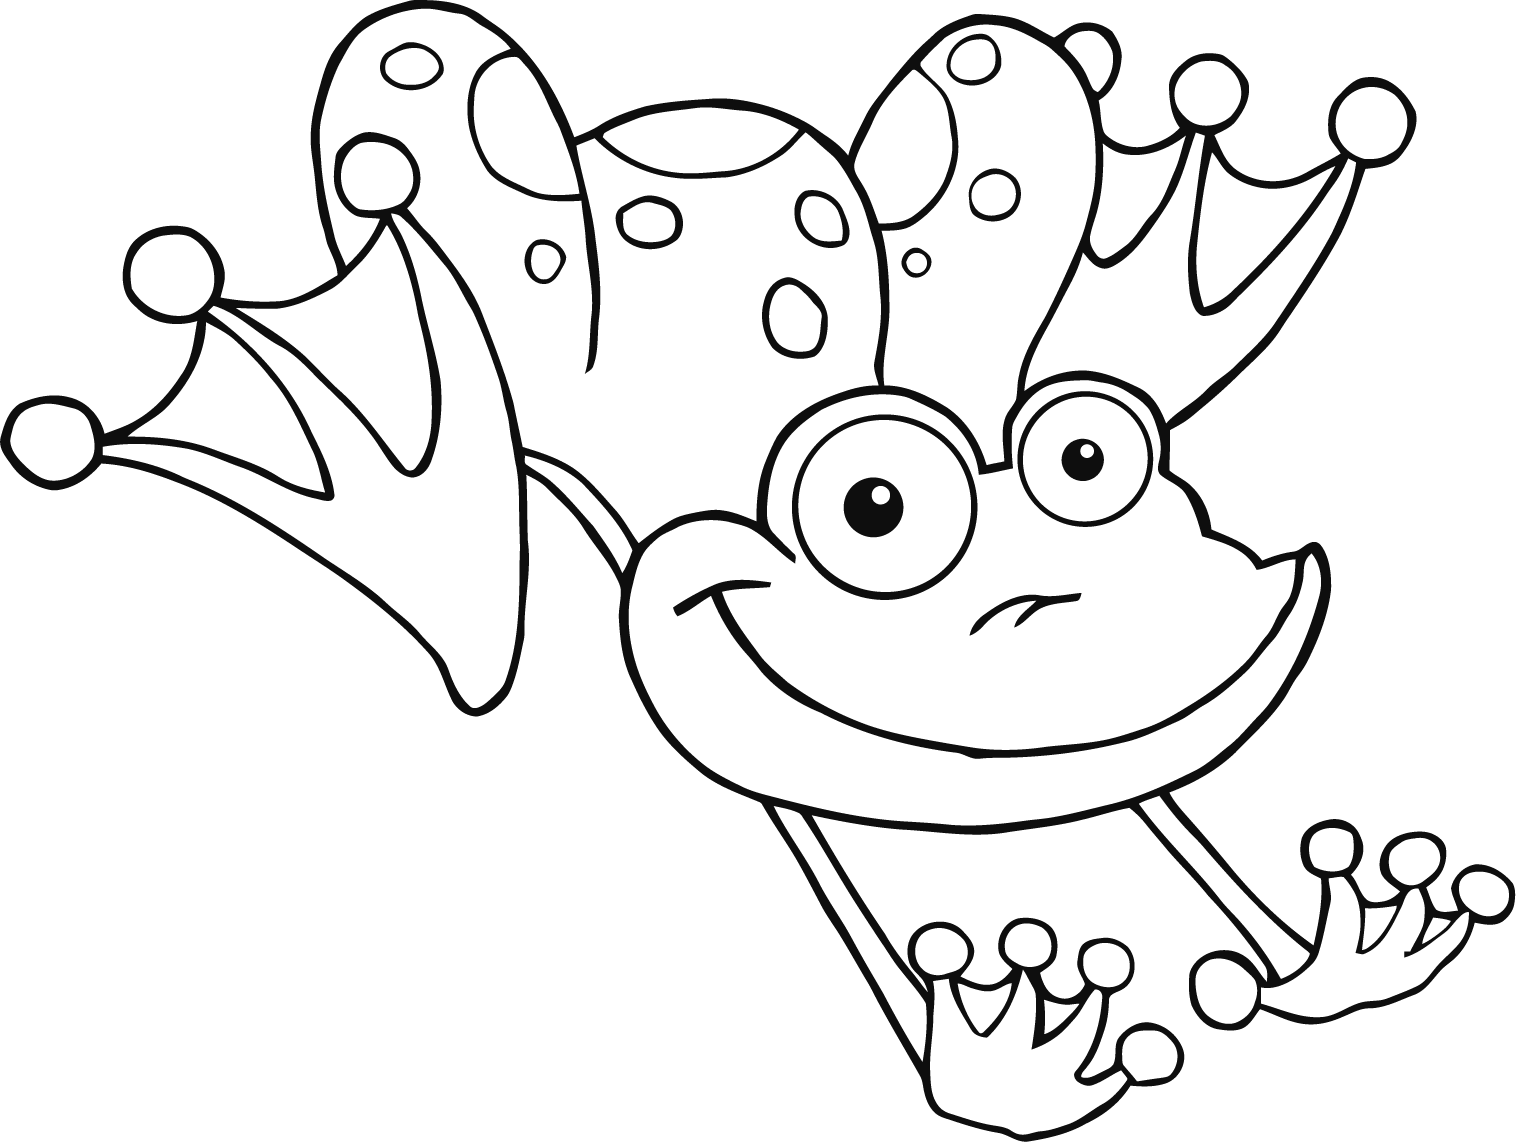 Free Printable Coloring Pages Of Frogs - High Quality Coloring Pages